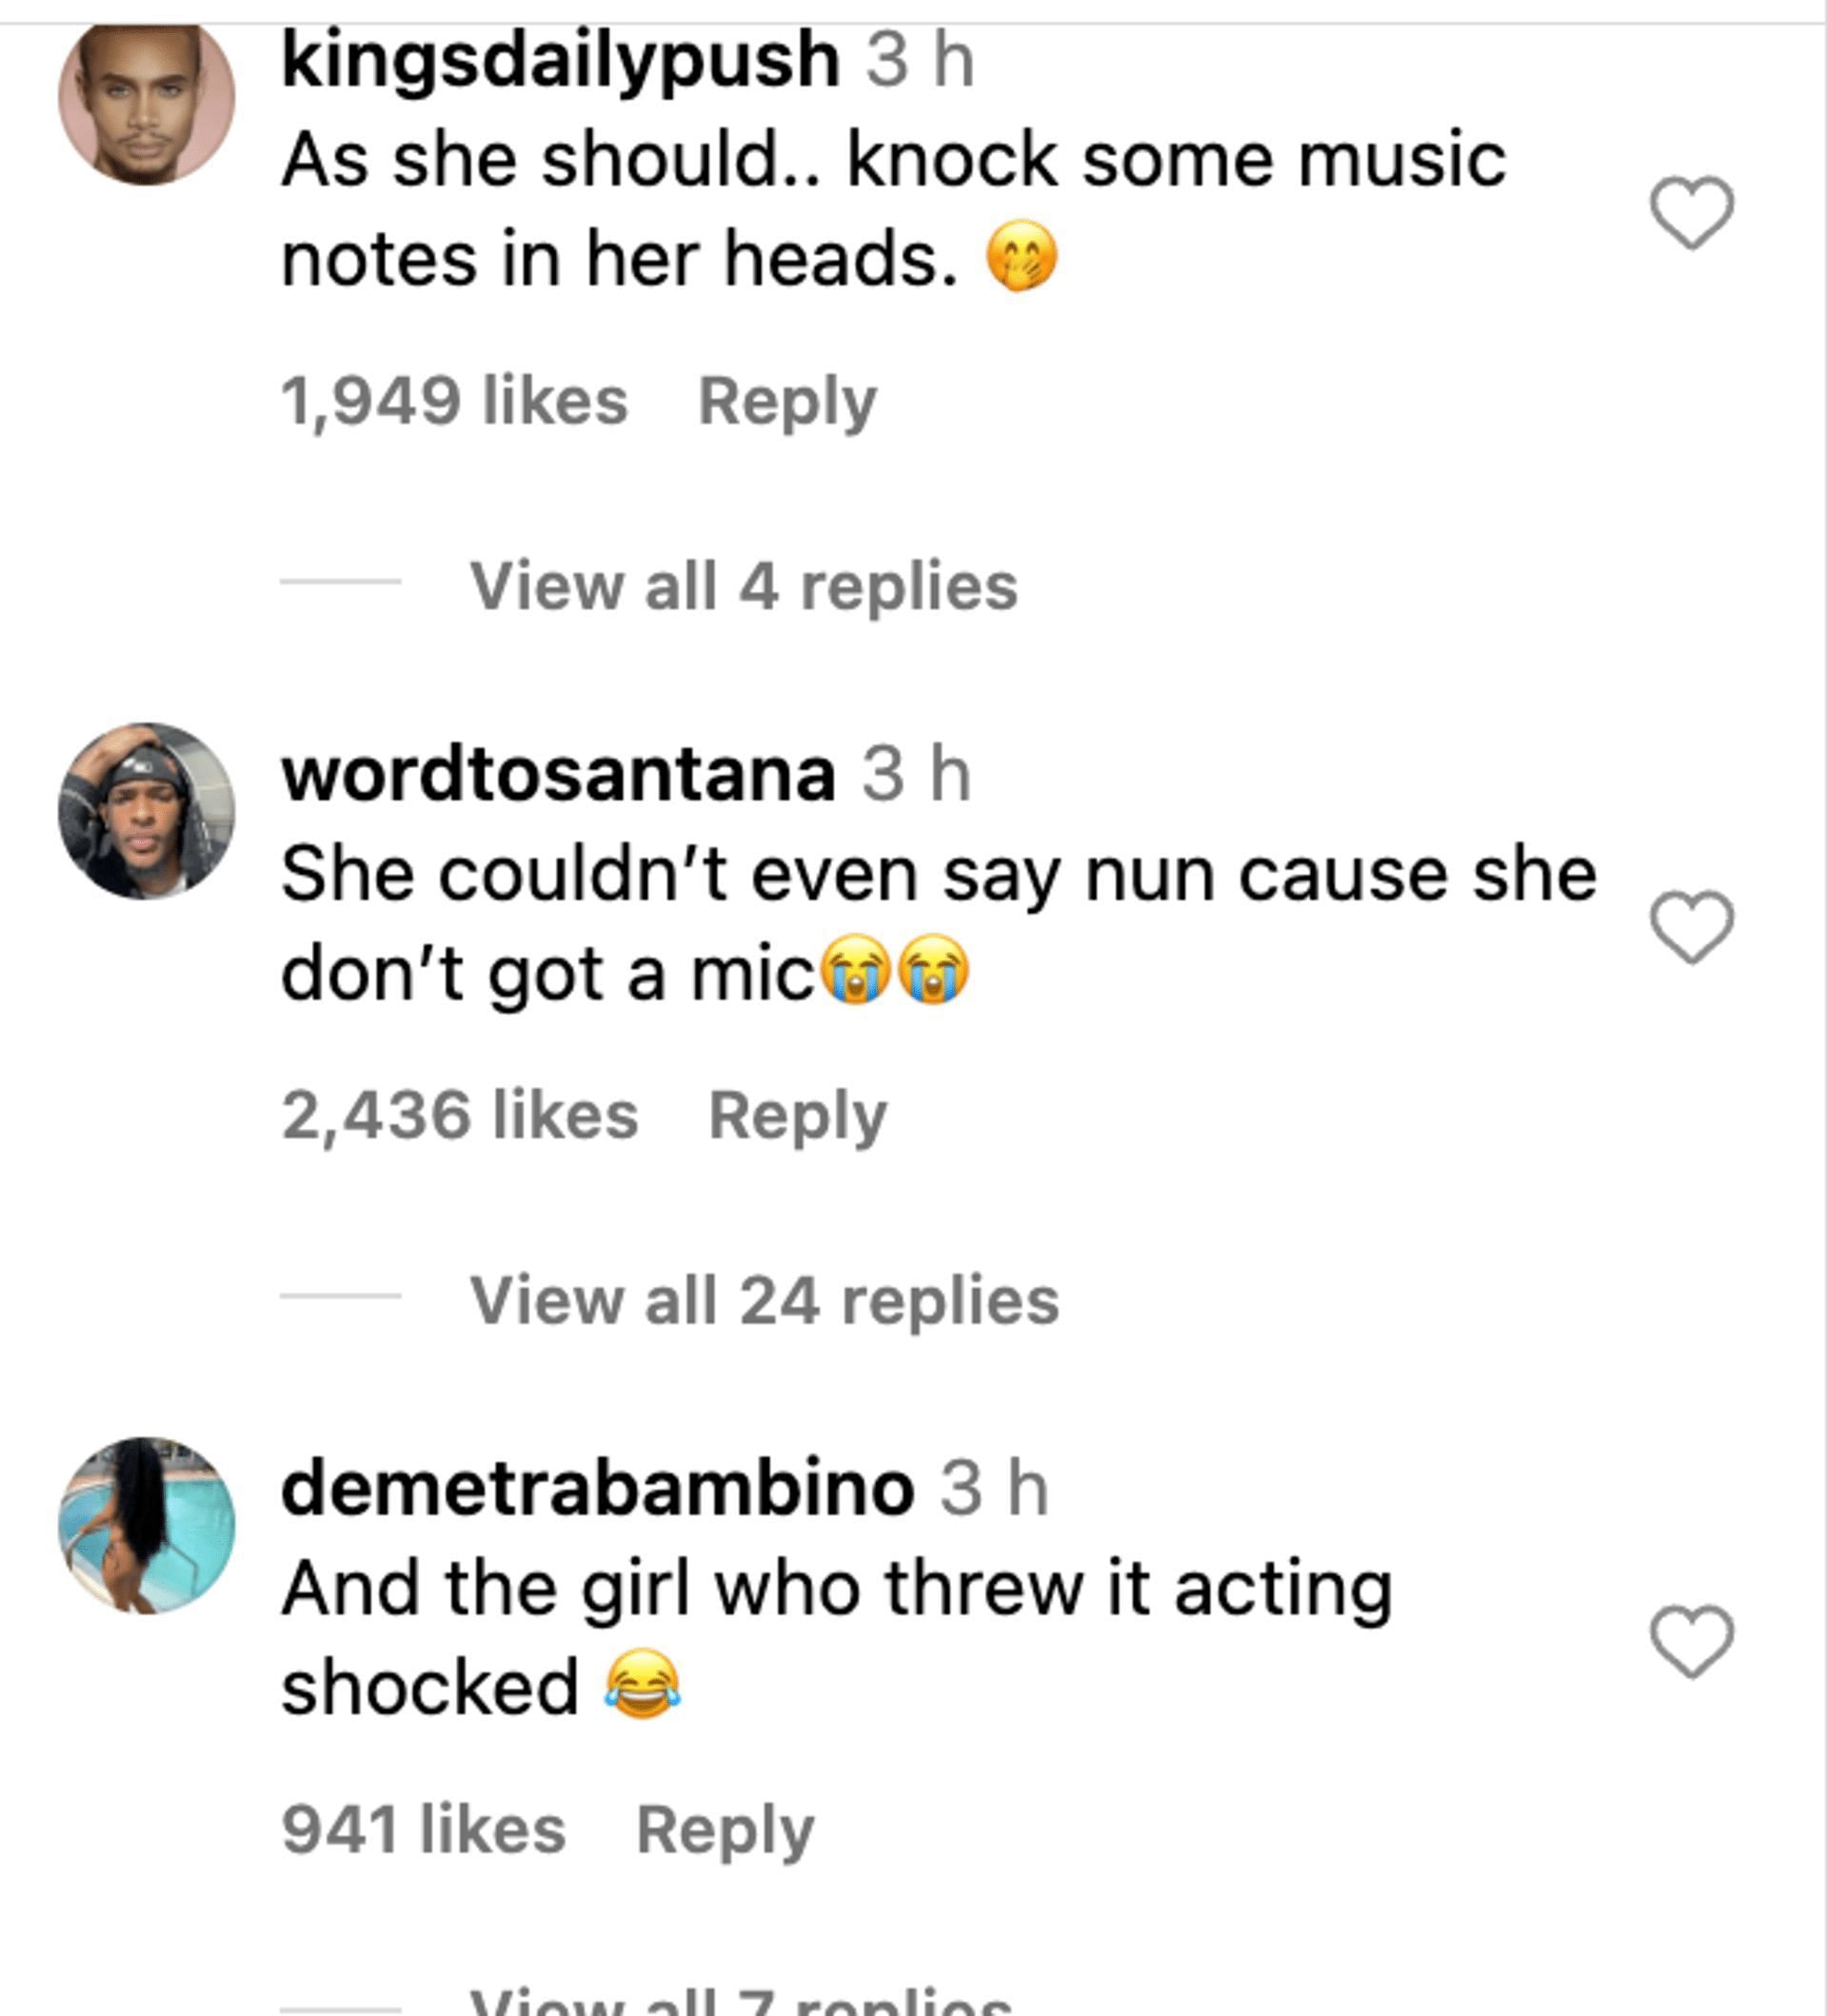 Social media users shared reactions after rapper threw a mic at one of the audience members. (Image via Twitter)